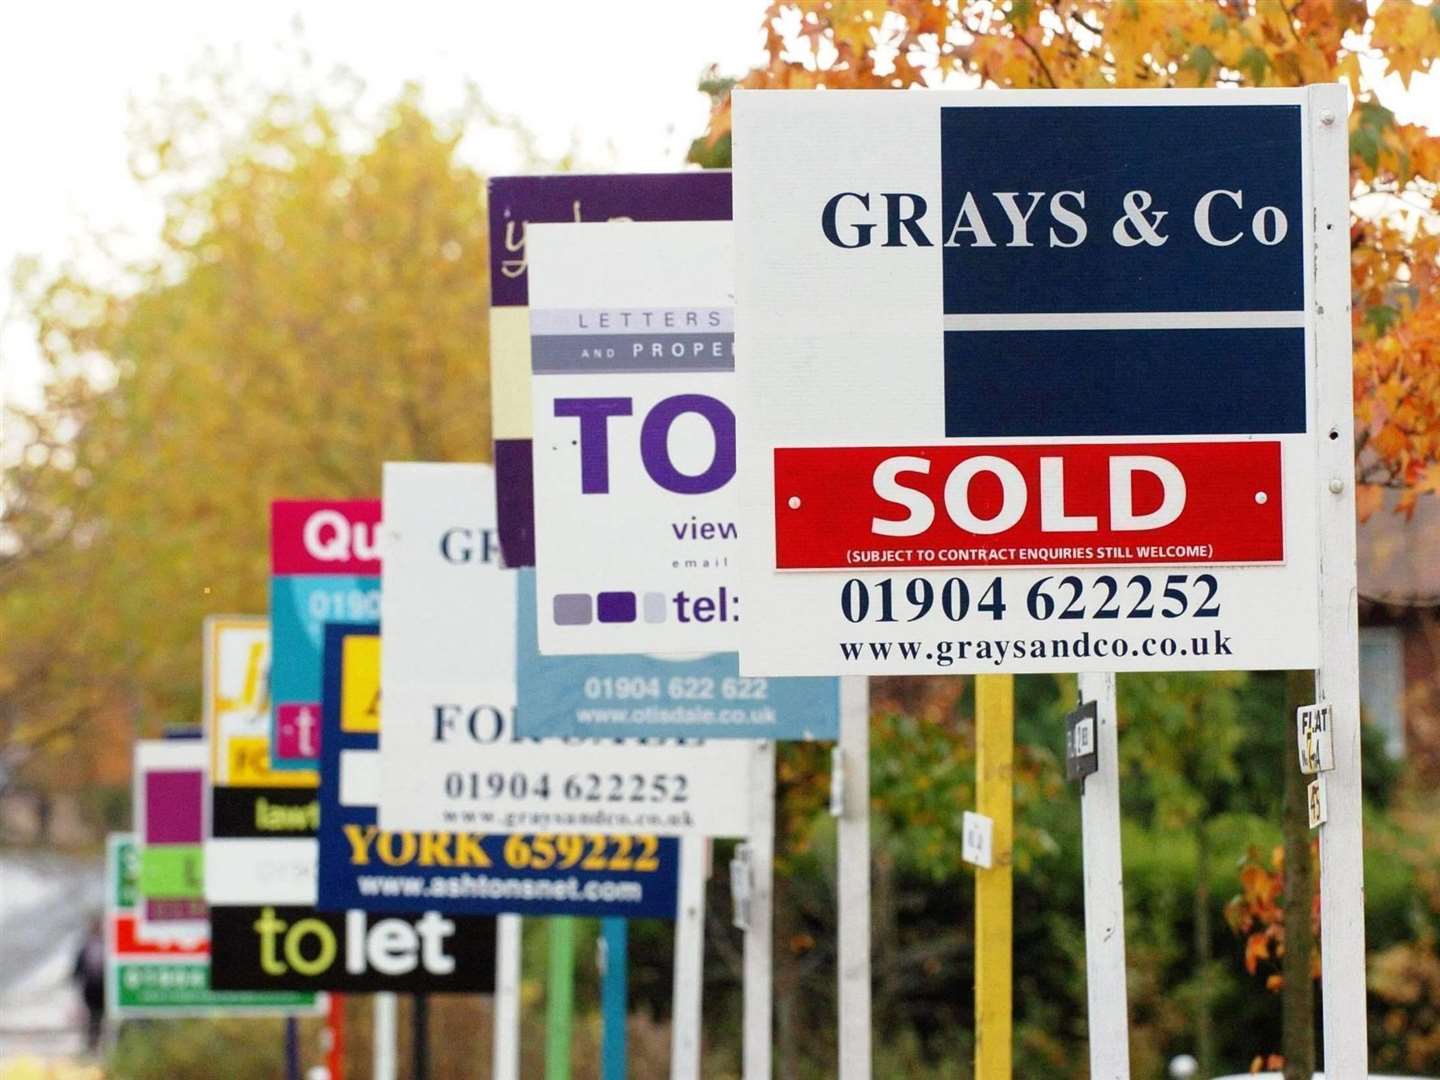 House prices have declined slightly in Kent